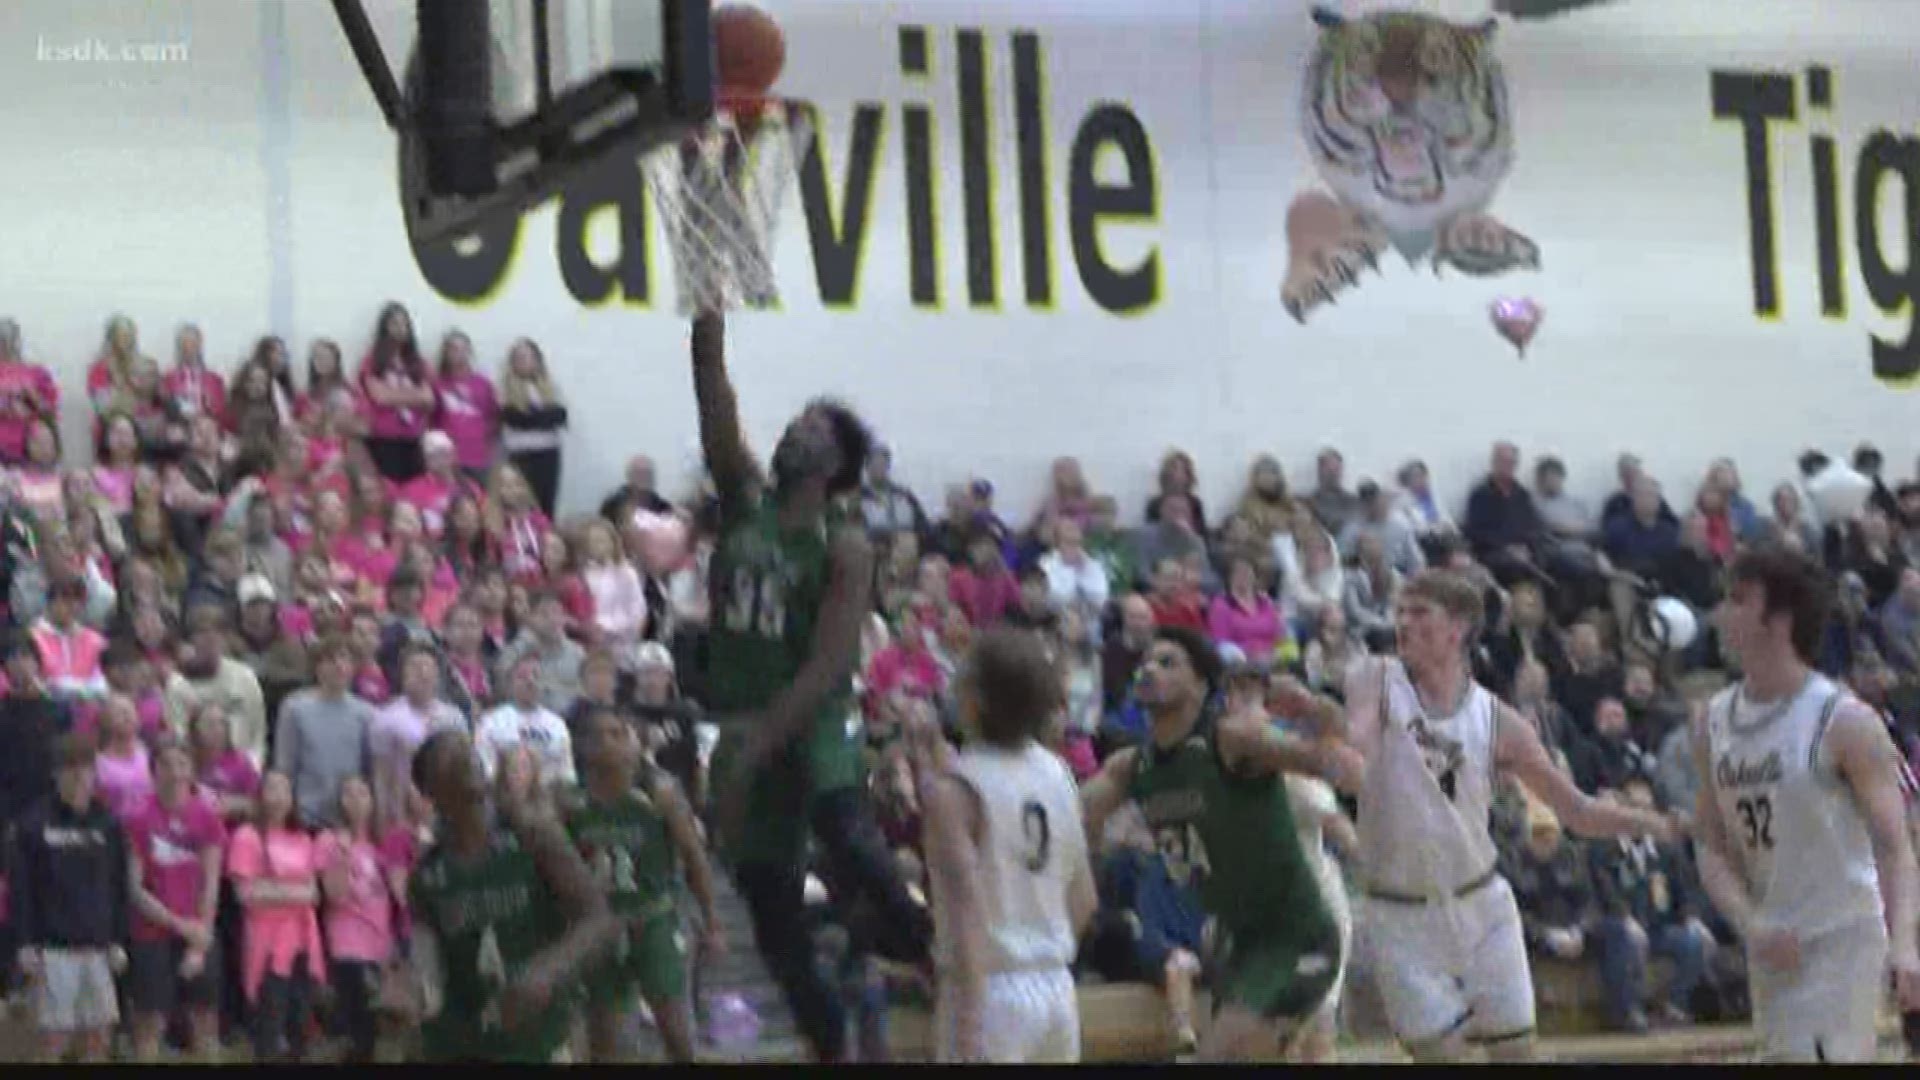 Mehlville improves on their nice season with a big win over their rivals from Oakville.